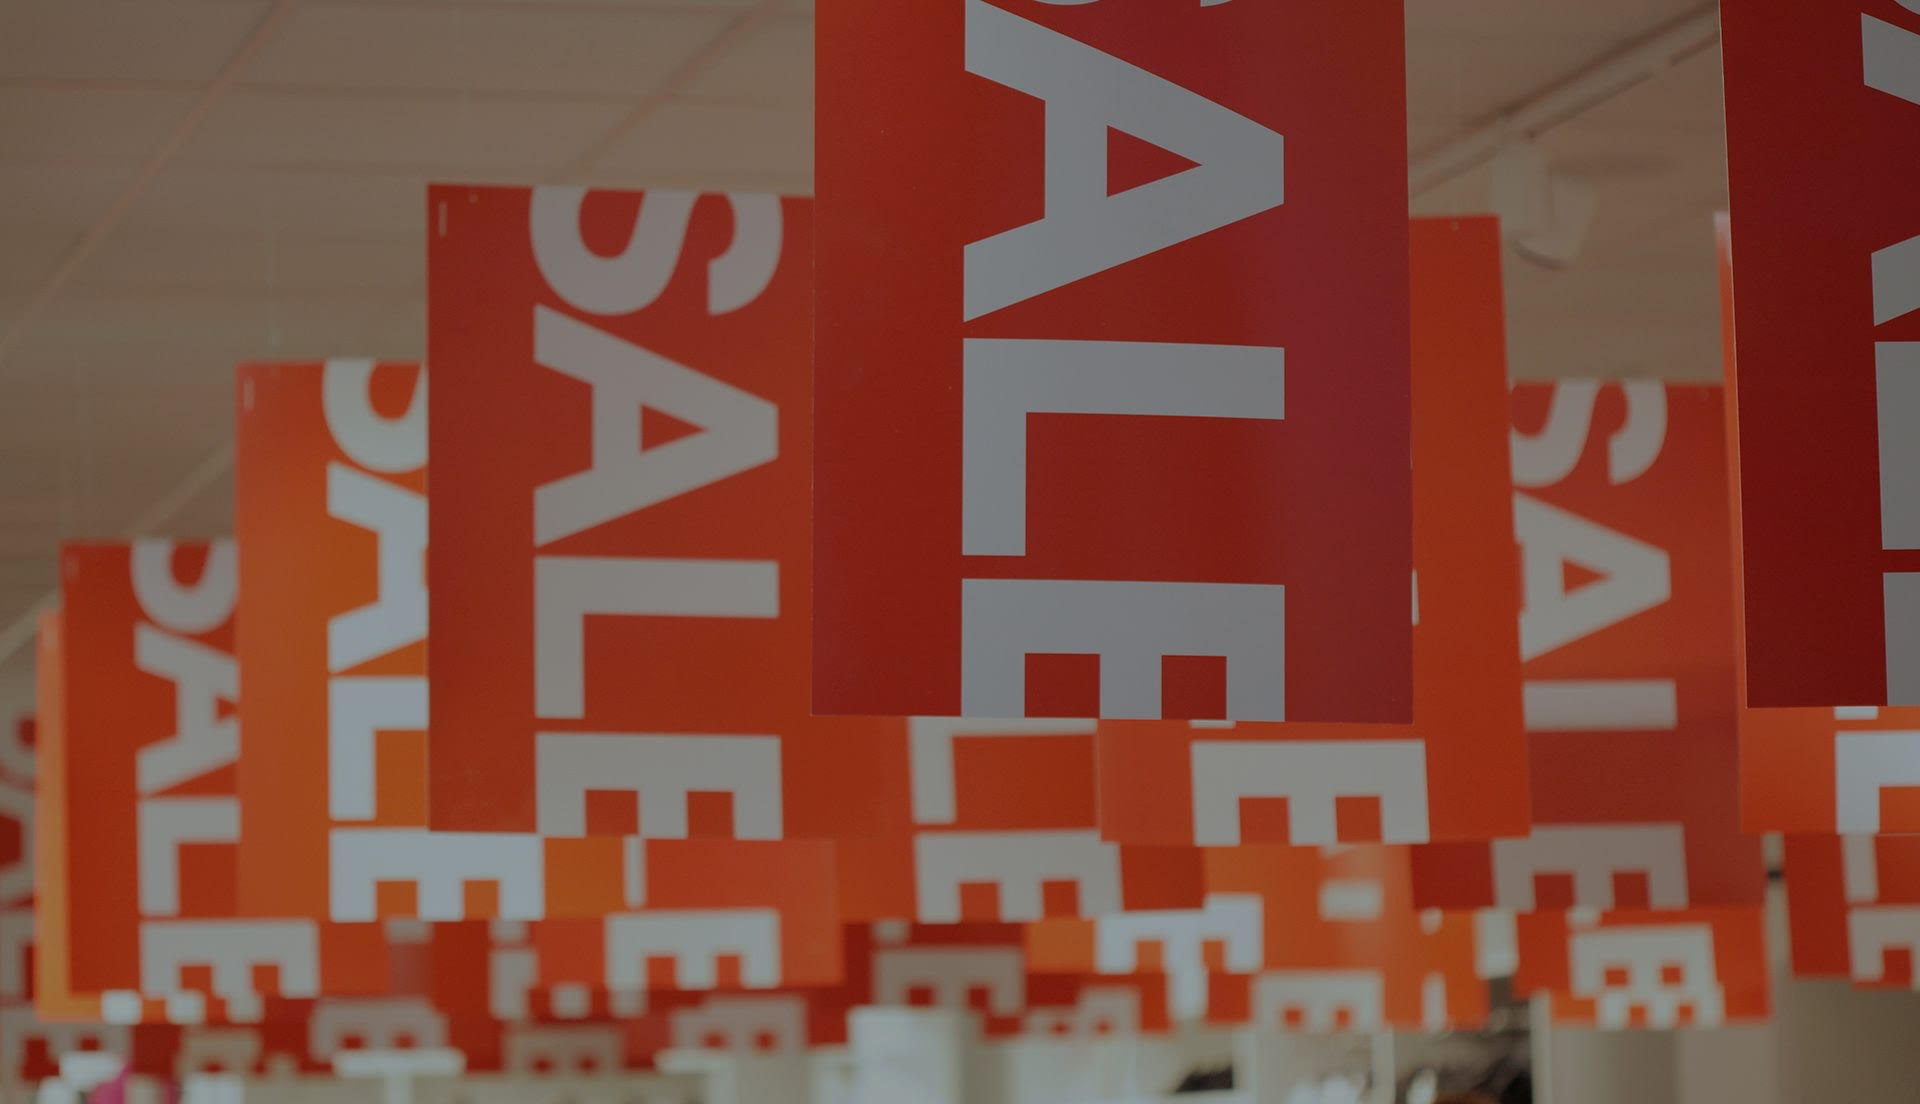 find an undervalued stock: red signs displaying the word 'sale' hang from the ceiling